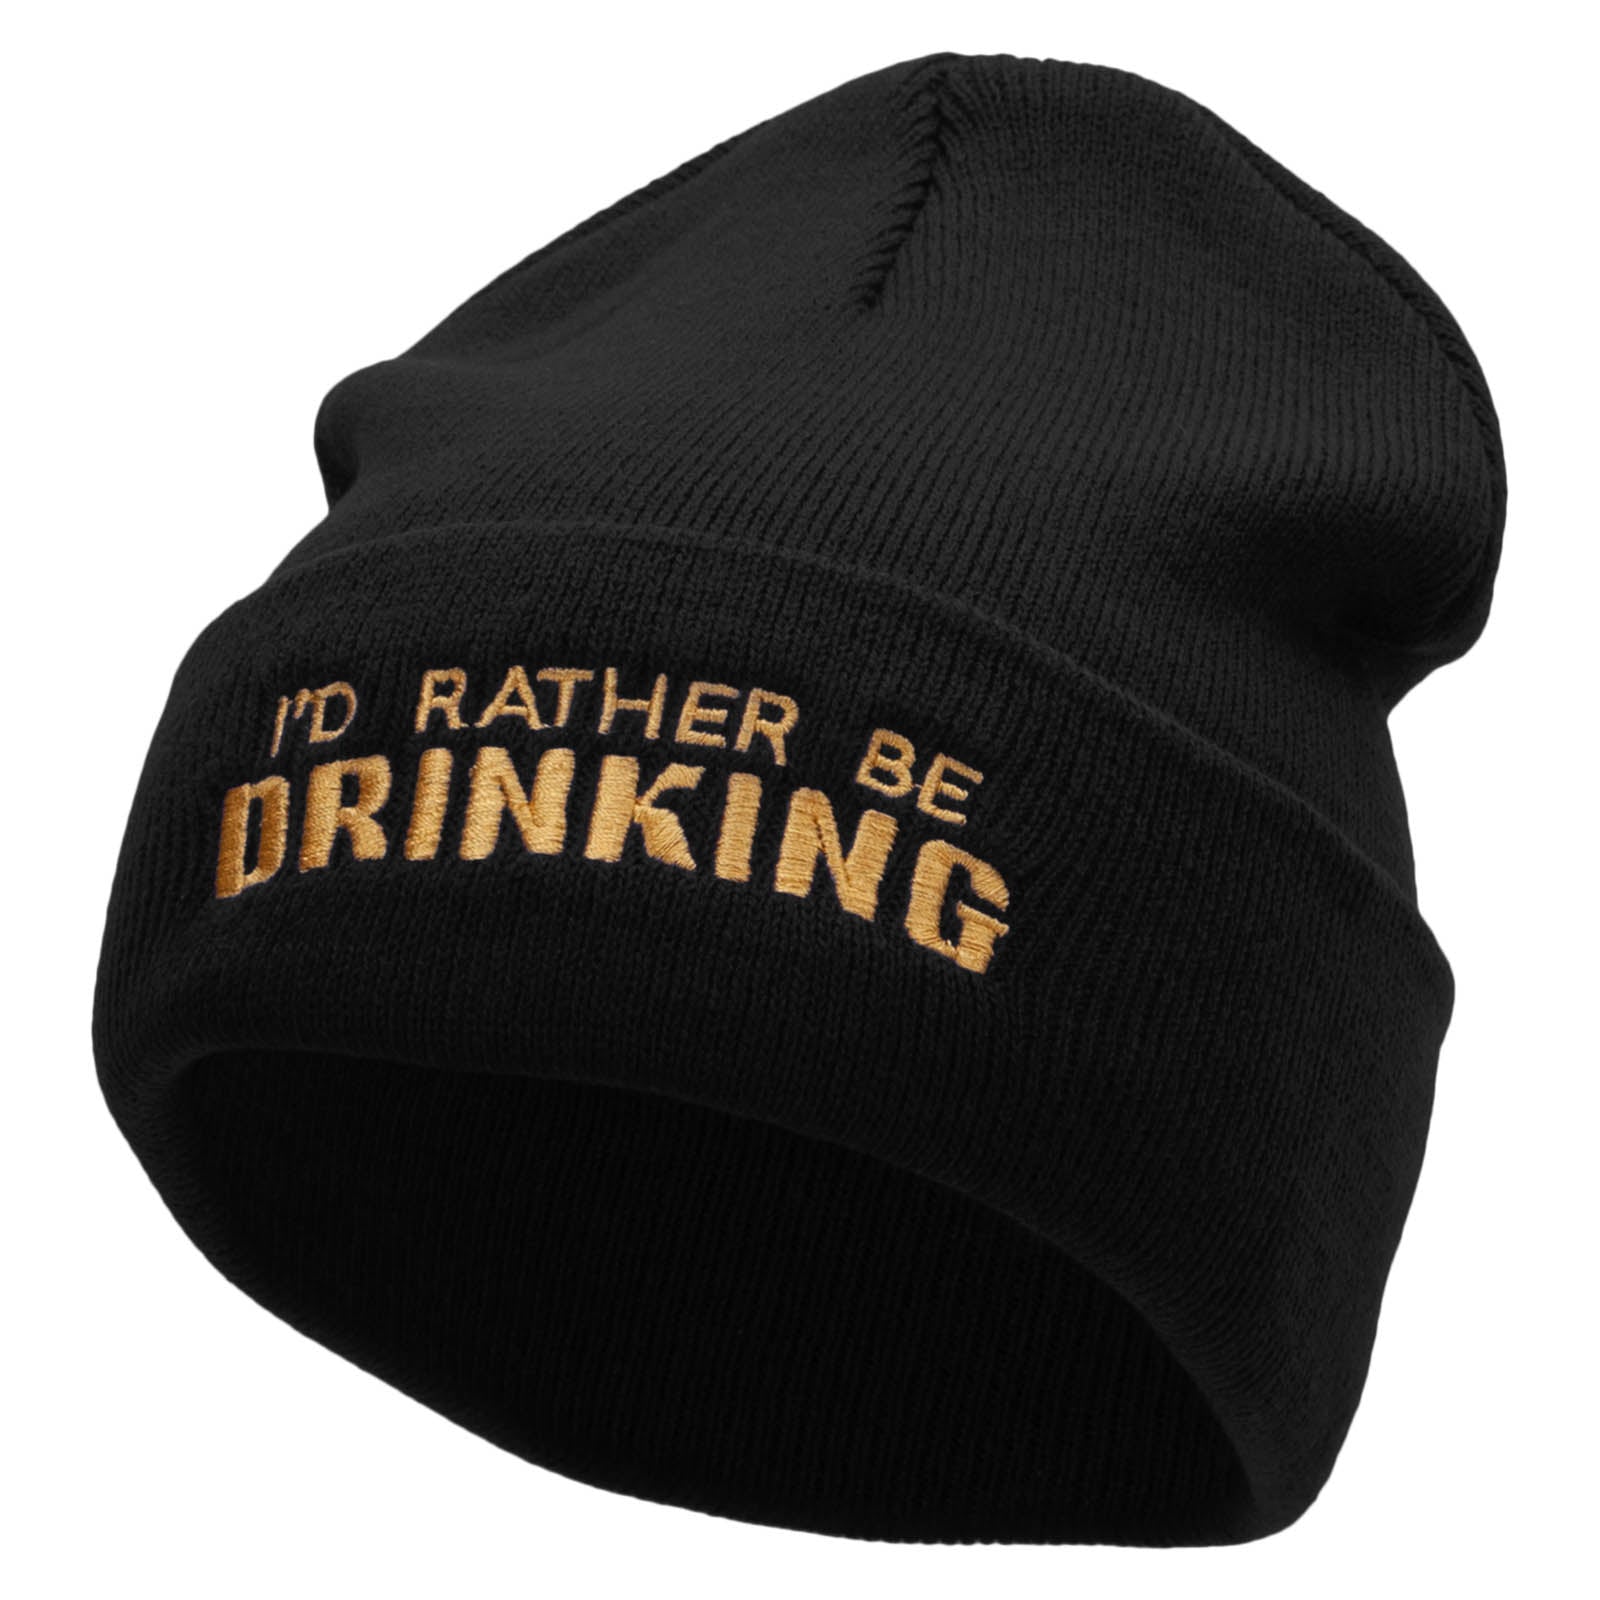 I &#039;d Rather Be Drinking Phrase Embroidered 12 Inch Long Knitted Beanie - Black OSFM